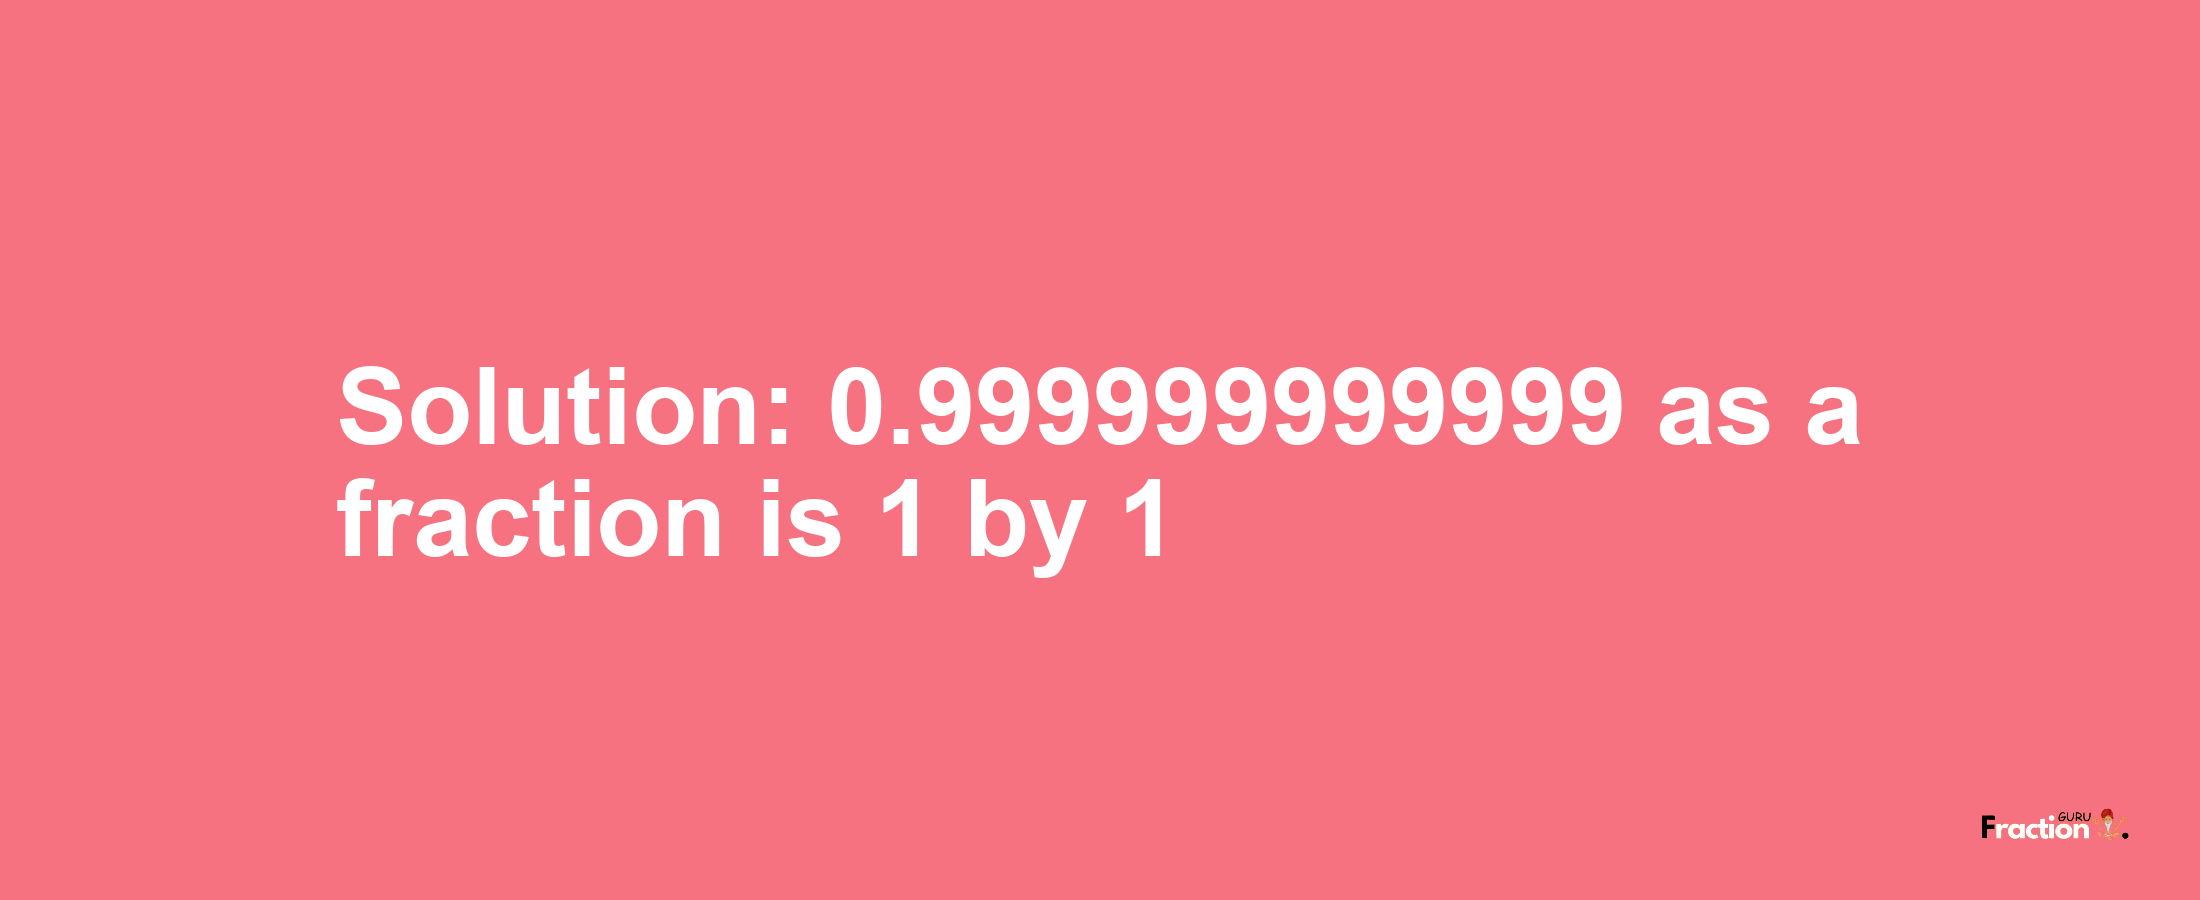 Solution:0.999999999999 as a fraction is 1/1